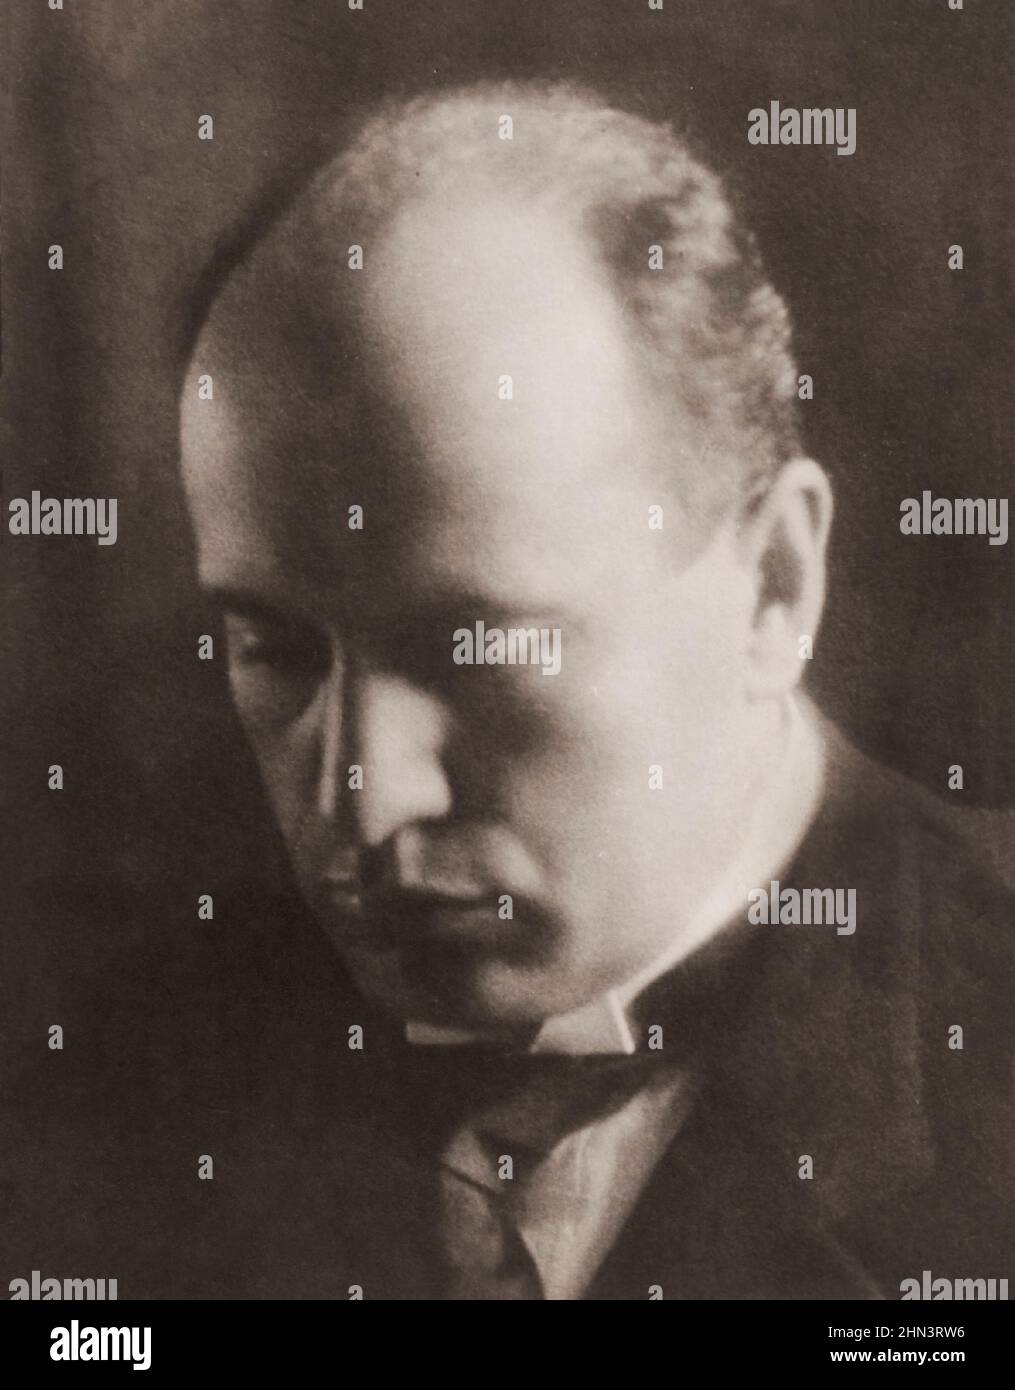 Vintage photo of Benito Mussolini. 1928 Benito Amilcare Andrea Mussolini (1883–1945) was an Italian politician and journalist who founded and led the Stock Photo